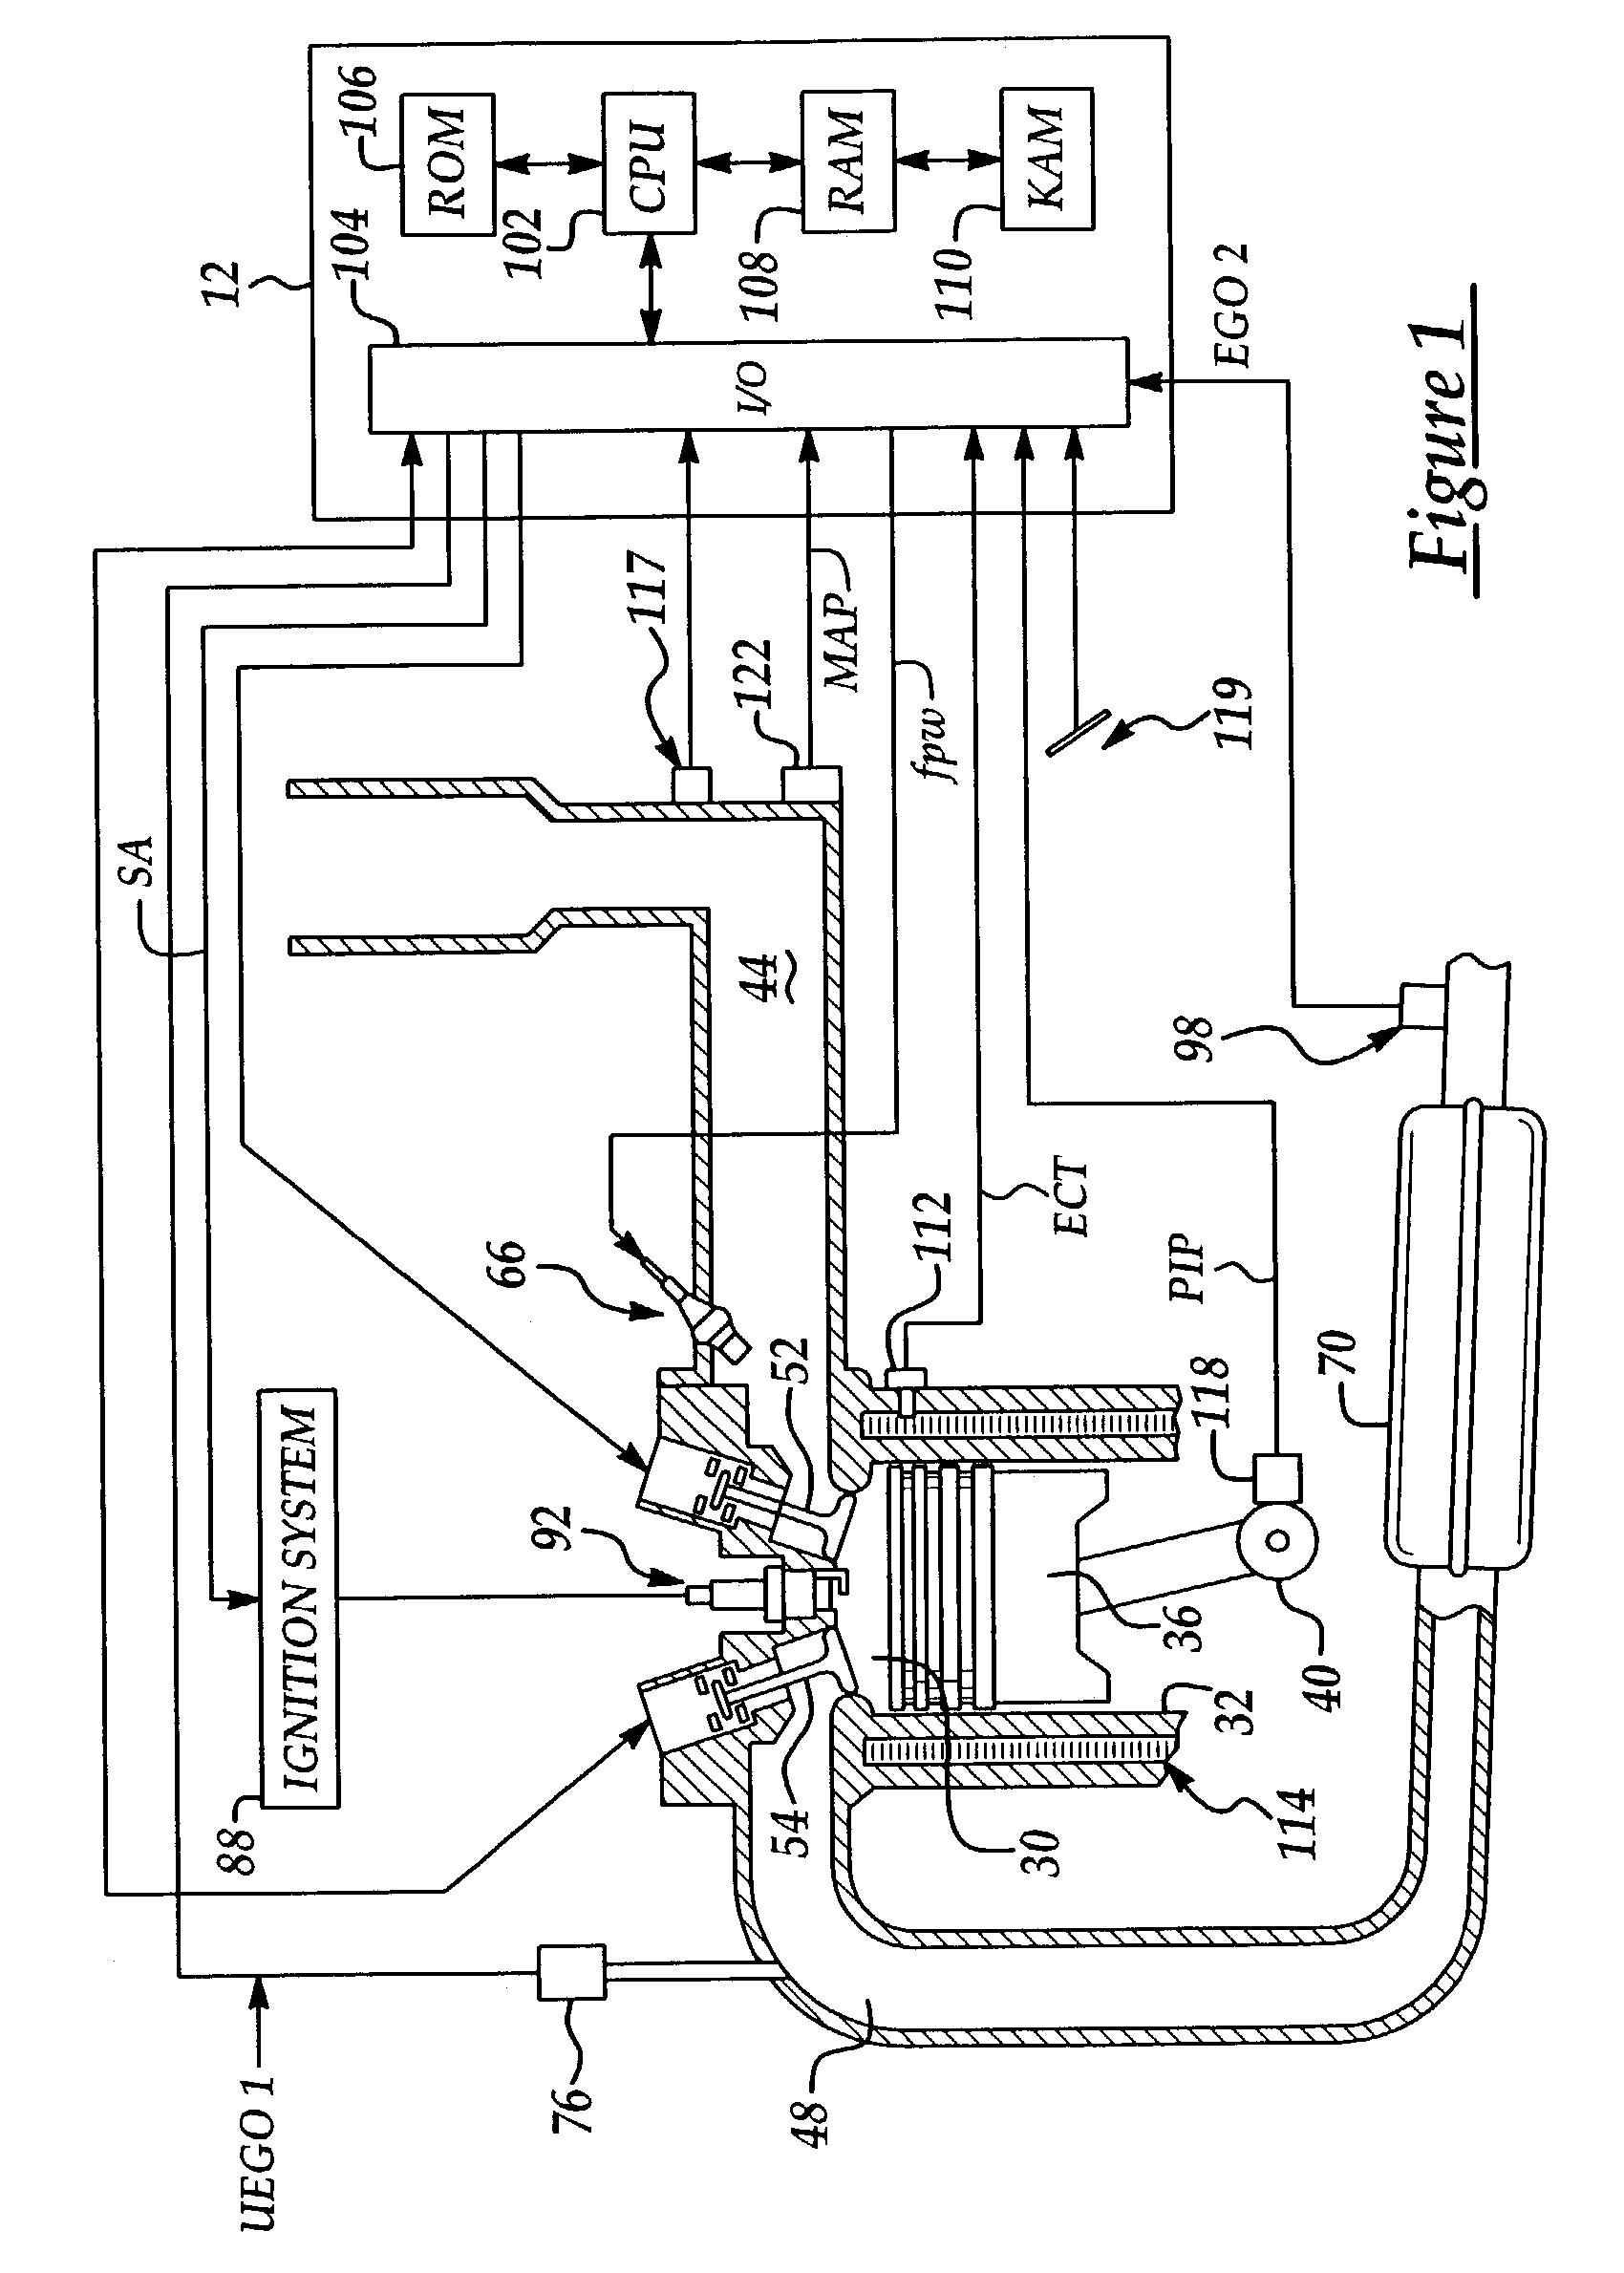 Catalyst temperature control on an electrically throttled engine